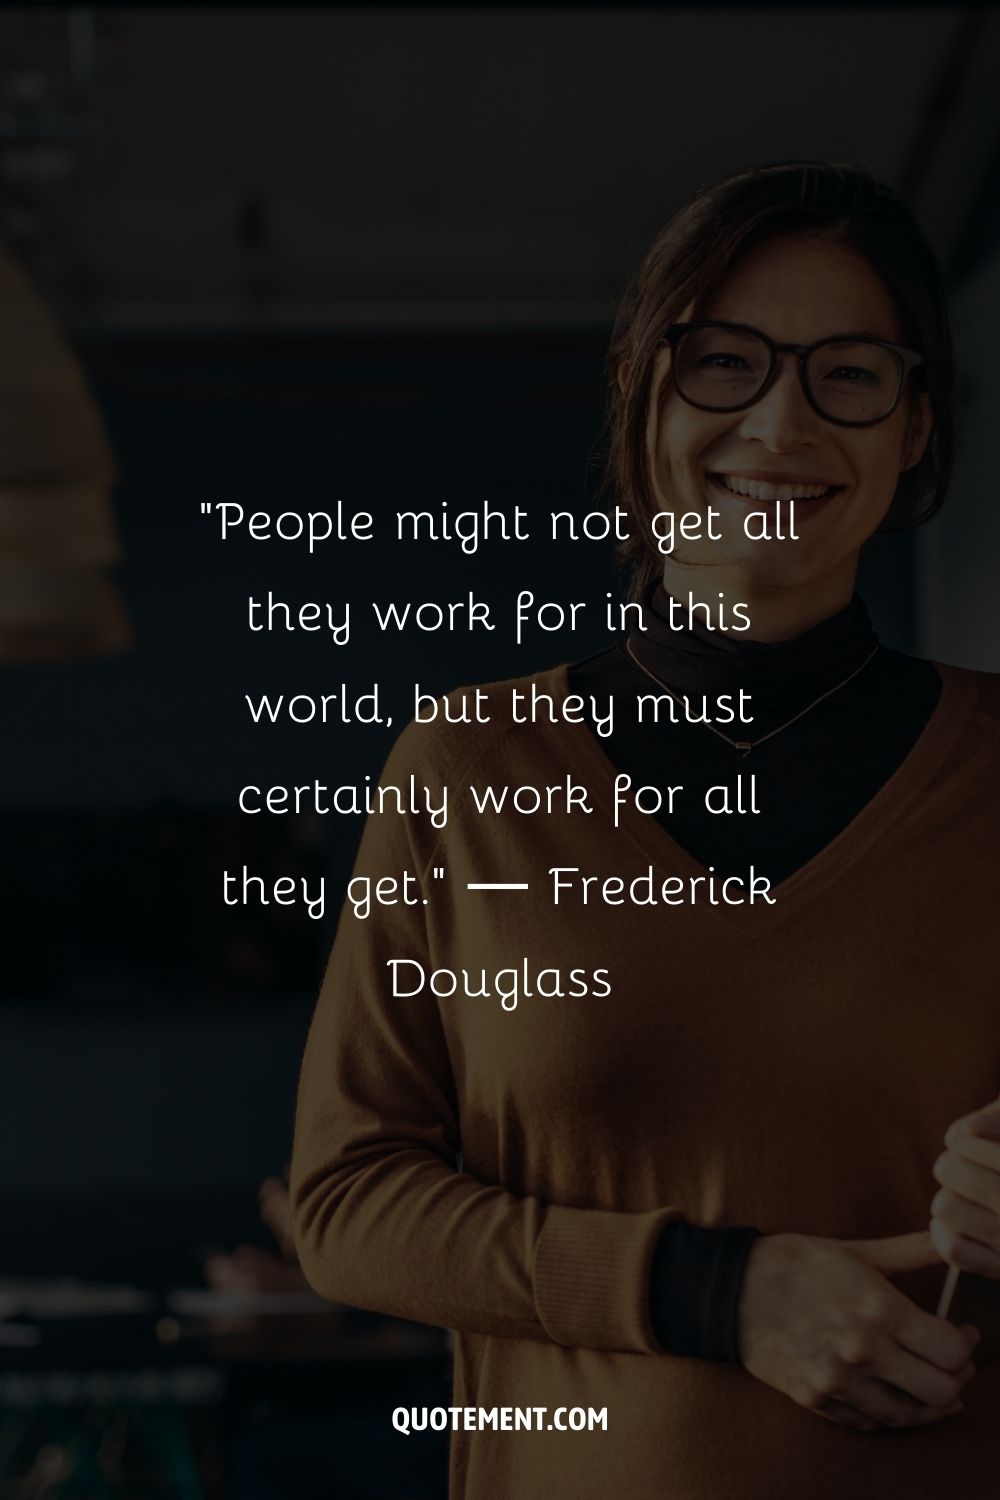 “People might not get all they work for in this world, but they must certainly work for all they get.” ― Frederick Douglass